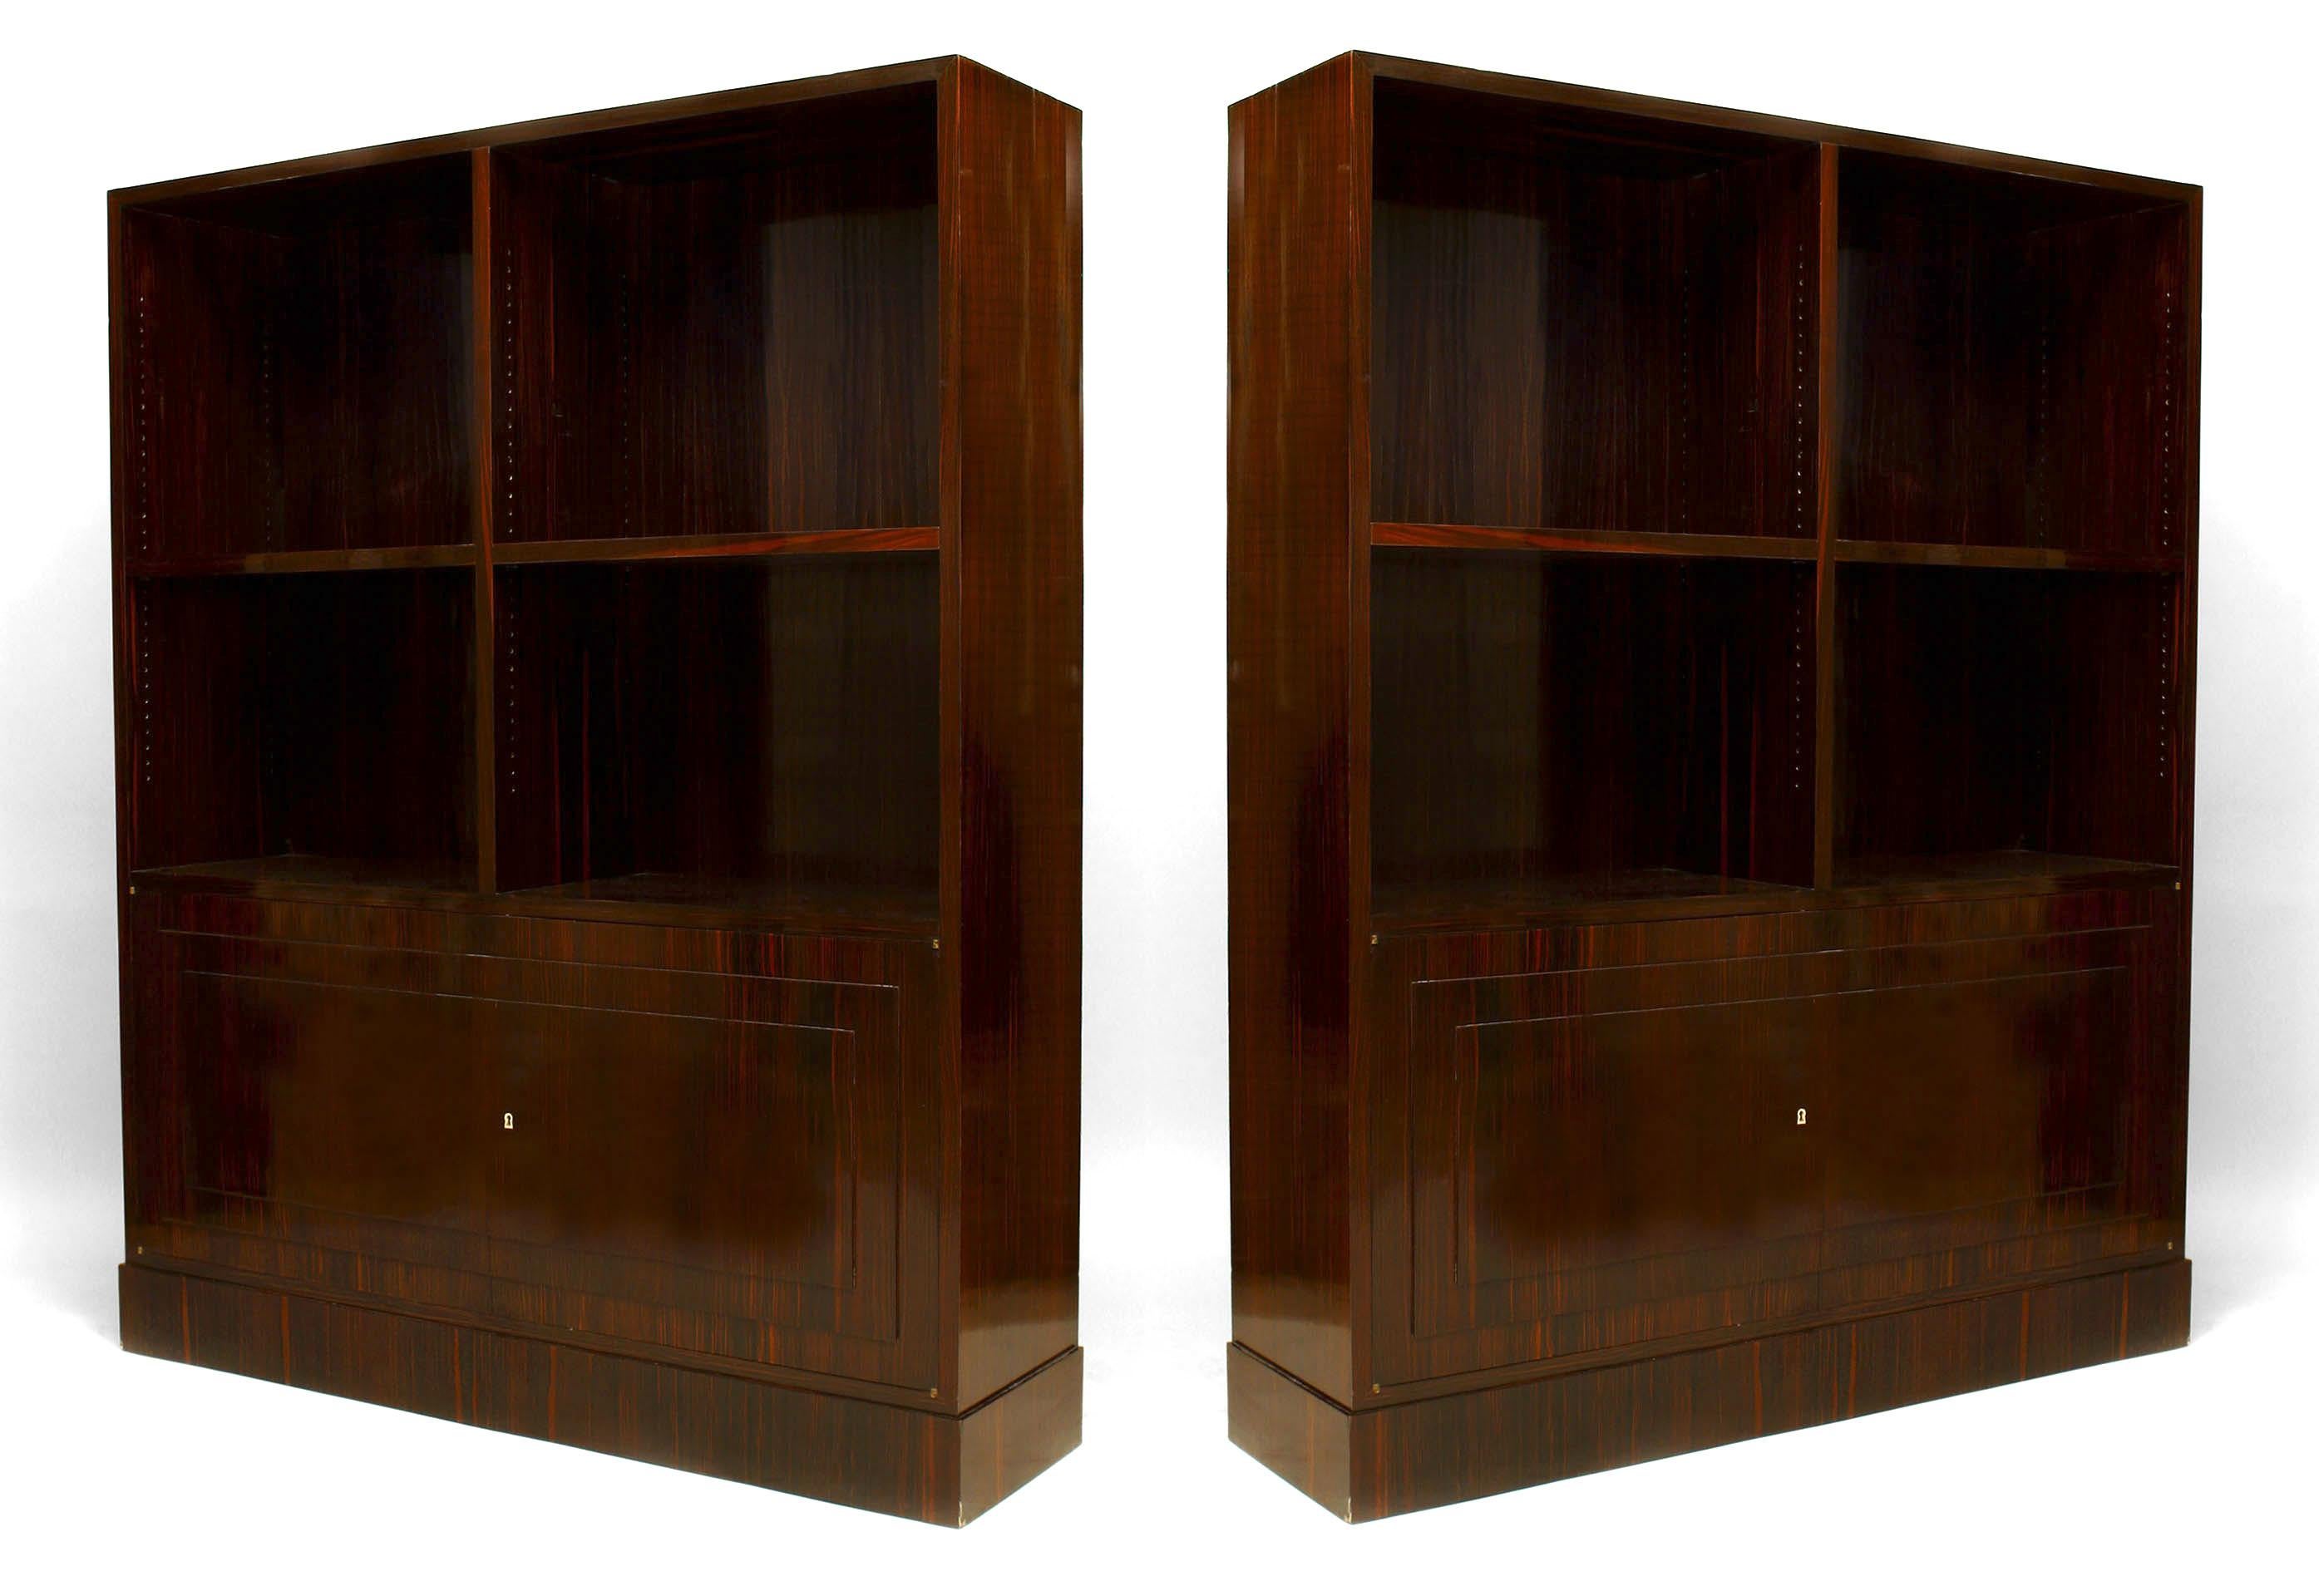 Pair of French Art Deco calamander wood bookcase cabinets with two open book shelves.
 